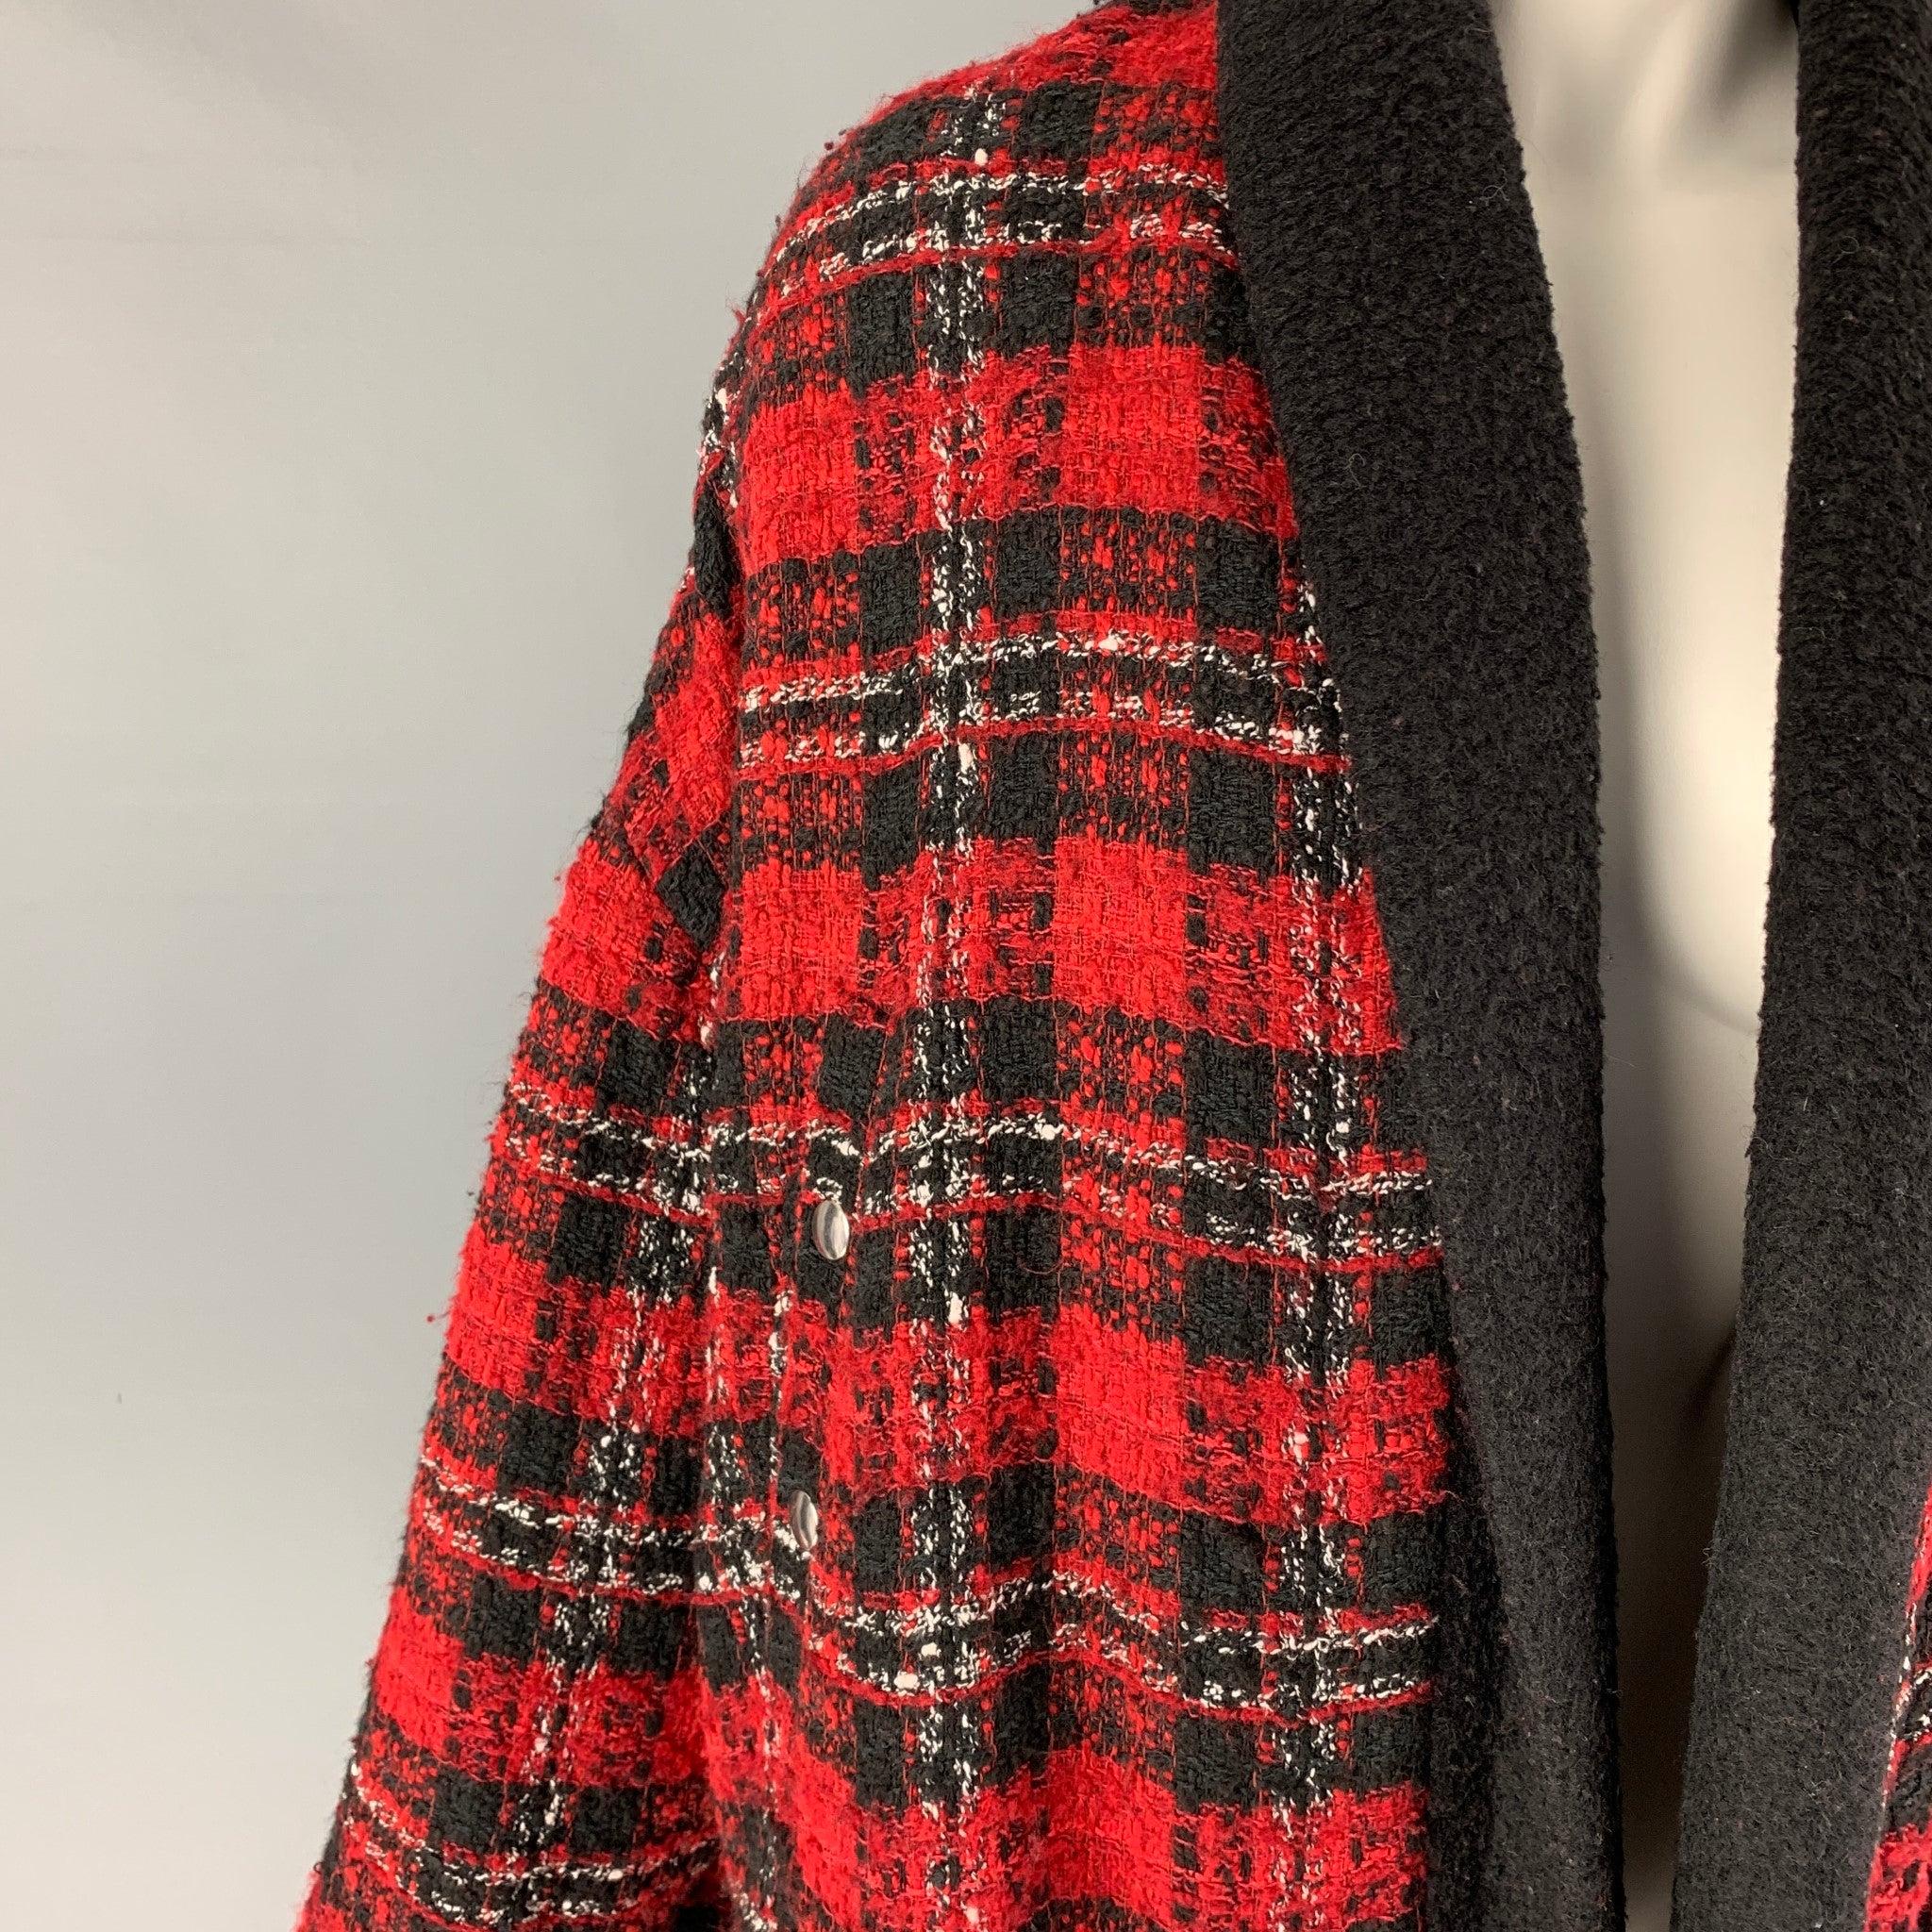 THE KOOPLES jacket comes in a red & black plaid acrylic blend featuring a shawl collar, oversized fit, flap pockets, and a open front.
Excellent
Pre-Owned Condition. 

Marked:   OS  

Measurements: 
 
Shoulder: 25 inches Bust: 64 inches Sleeve: 18.5